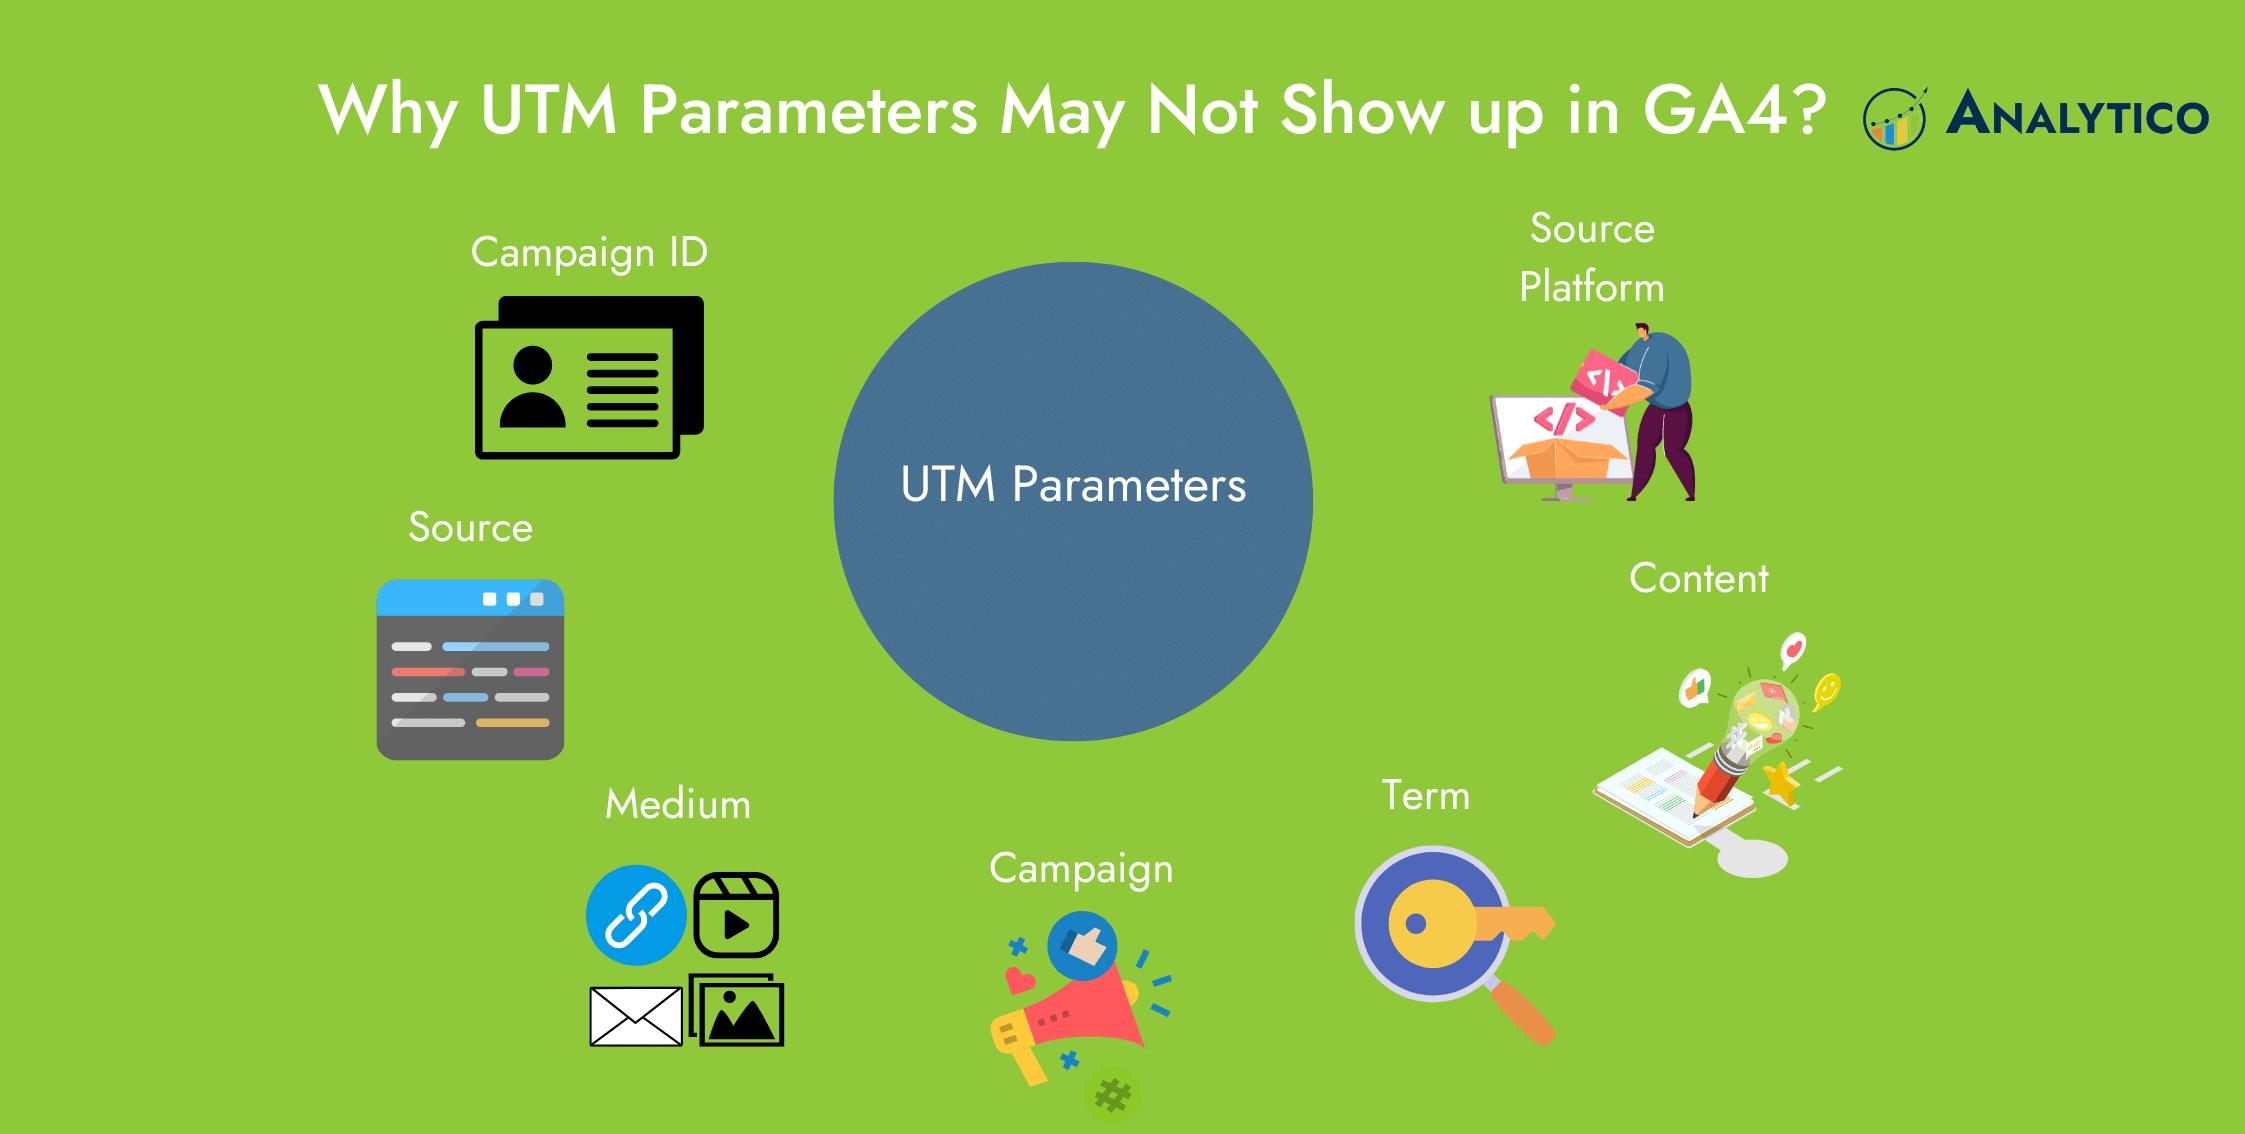 Why UTM Parameters May Not Show up in GA4?